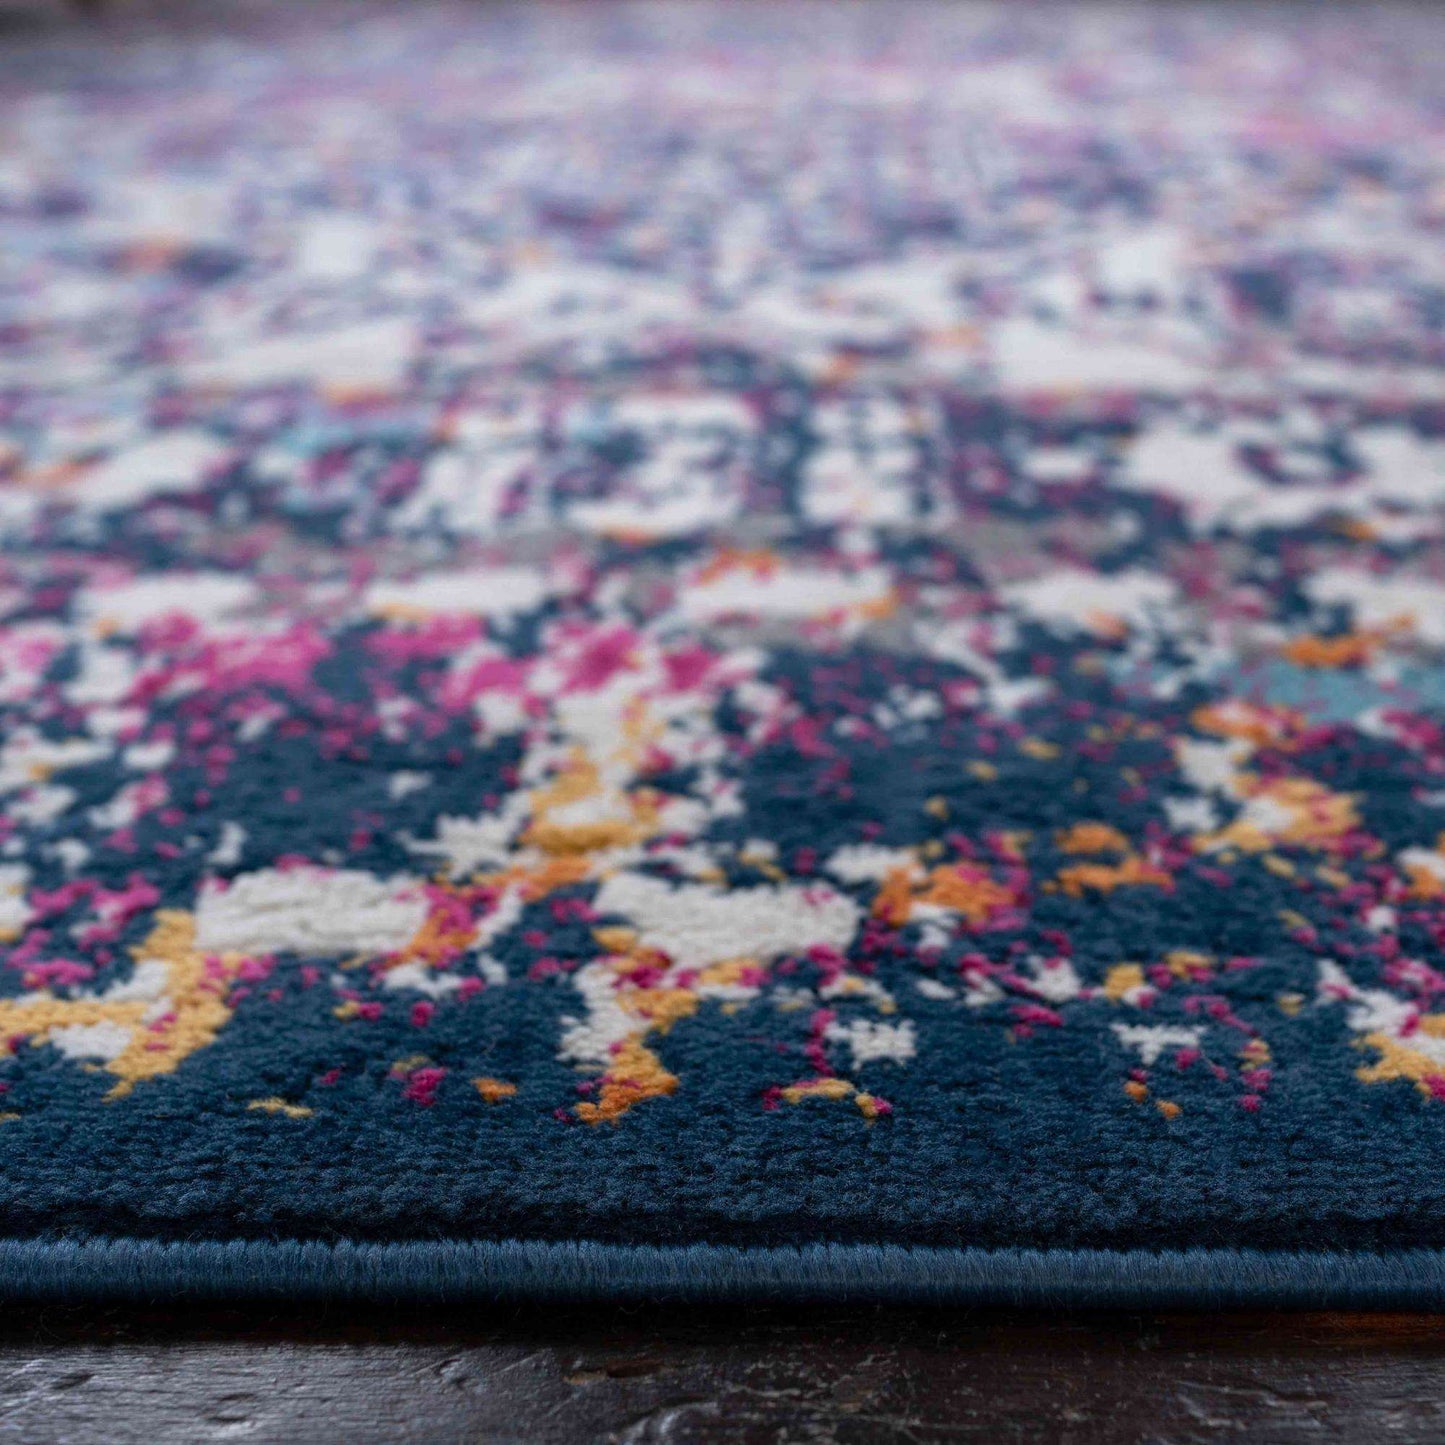 Faded Distressed Navy Pink Oriental Pattern Rug